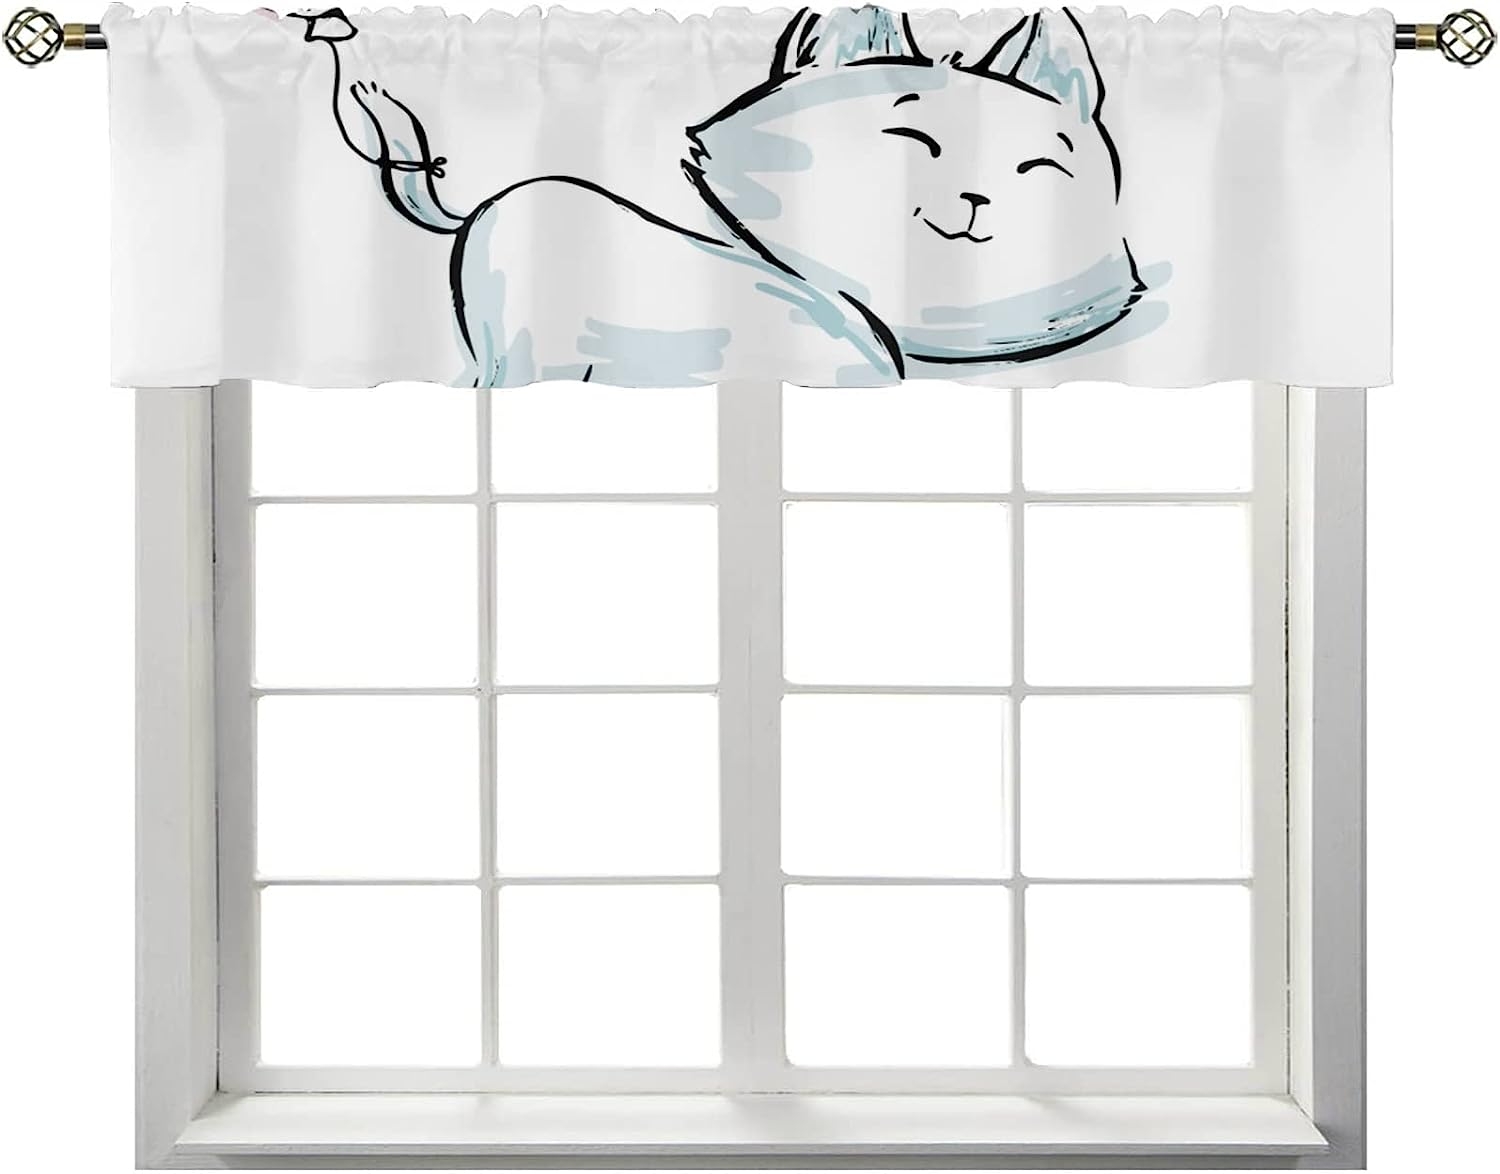 HHL Cat Balloon Cute Print Cool Kitty Window Valance for Kitchen Bedroom Living Room Basement Rod Pocket Durability Topper